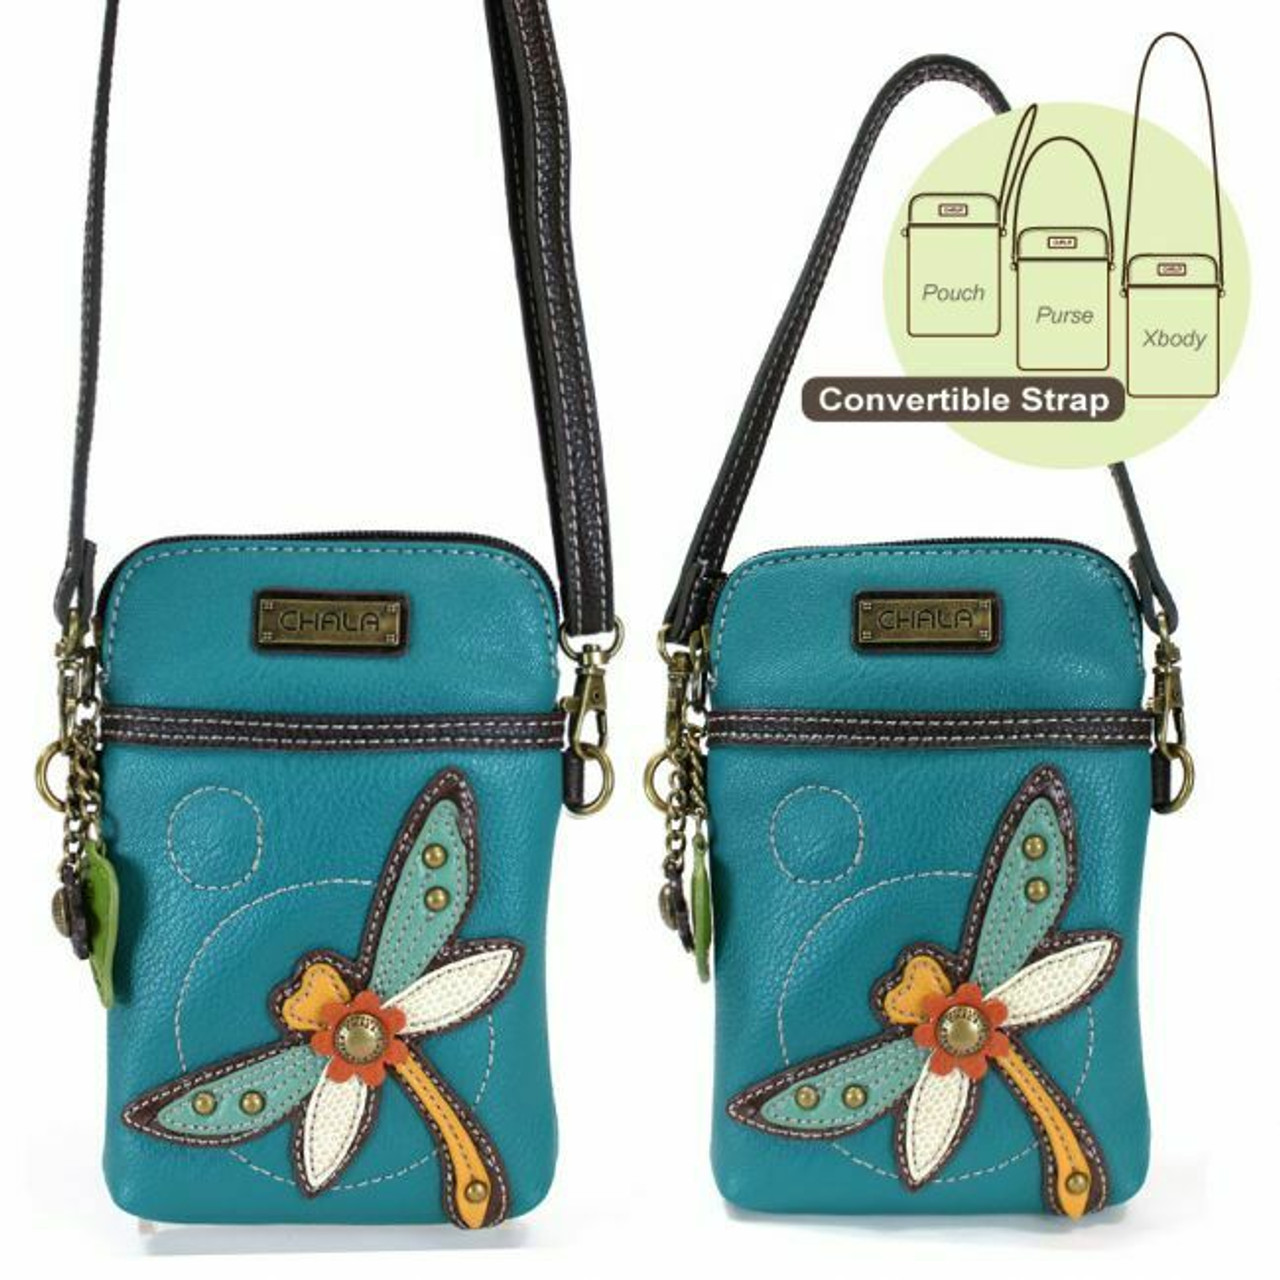 New Chala Cell Phone Purse Crossbody Pleather Converts DRAGONFLY Turquoise  Blue - MATZ Market